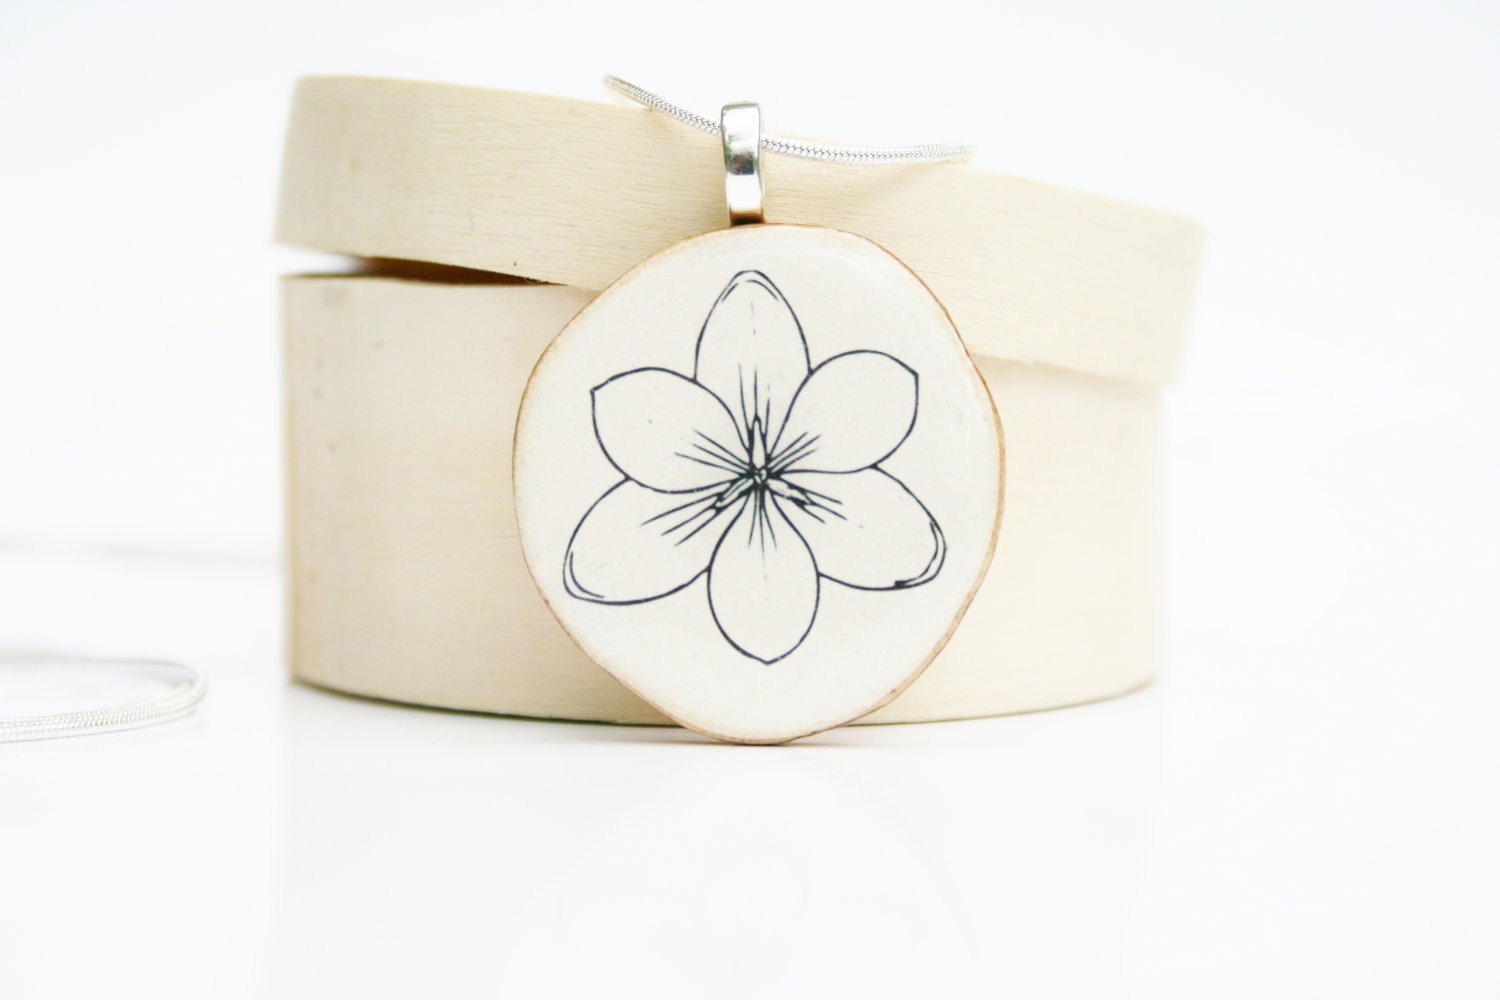 Pendant necklace white  floral Necklace Unique gifts gifts for her extra long necklace bohemian wood necklace - starlightwoods